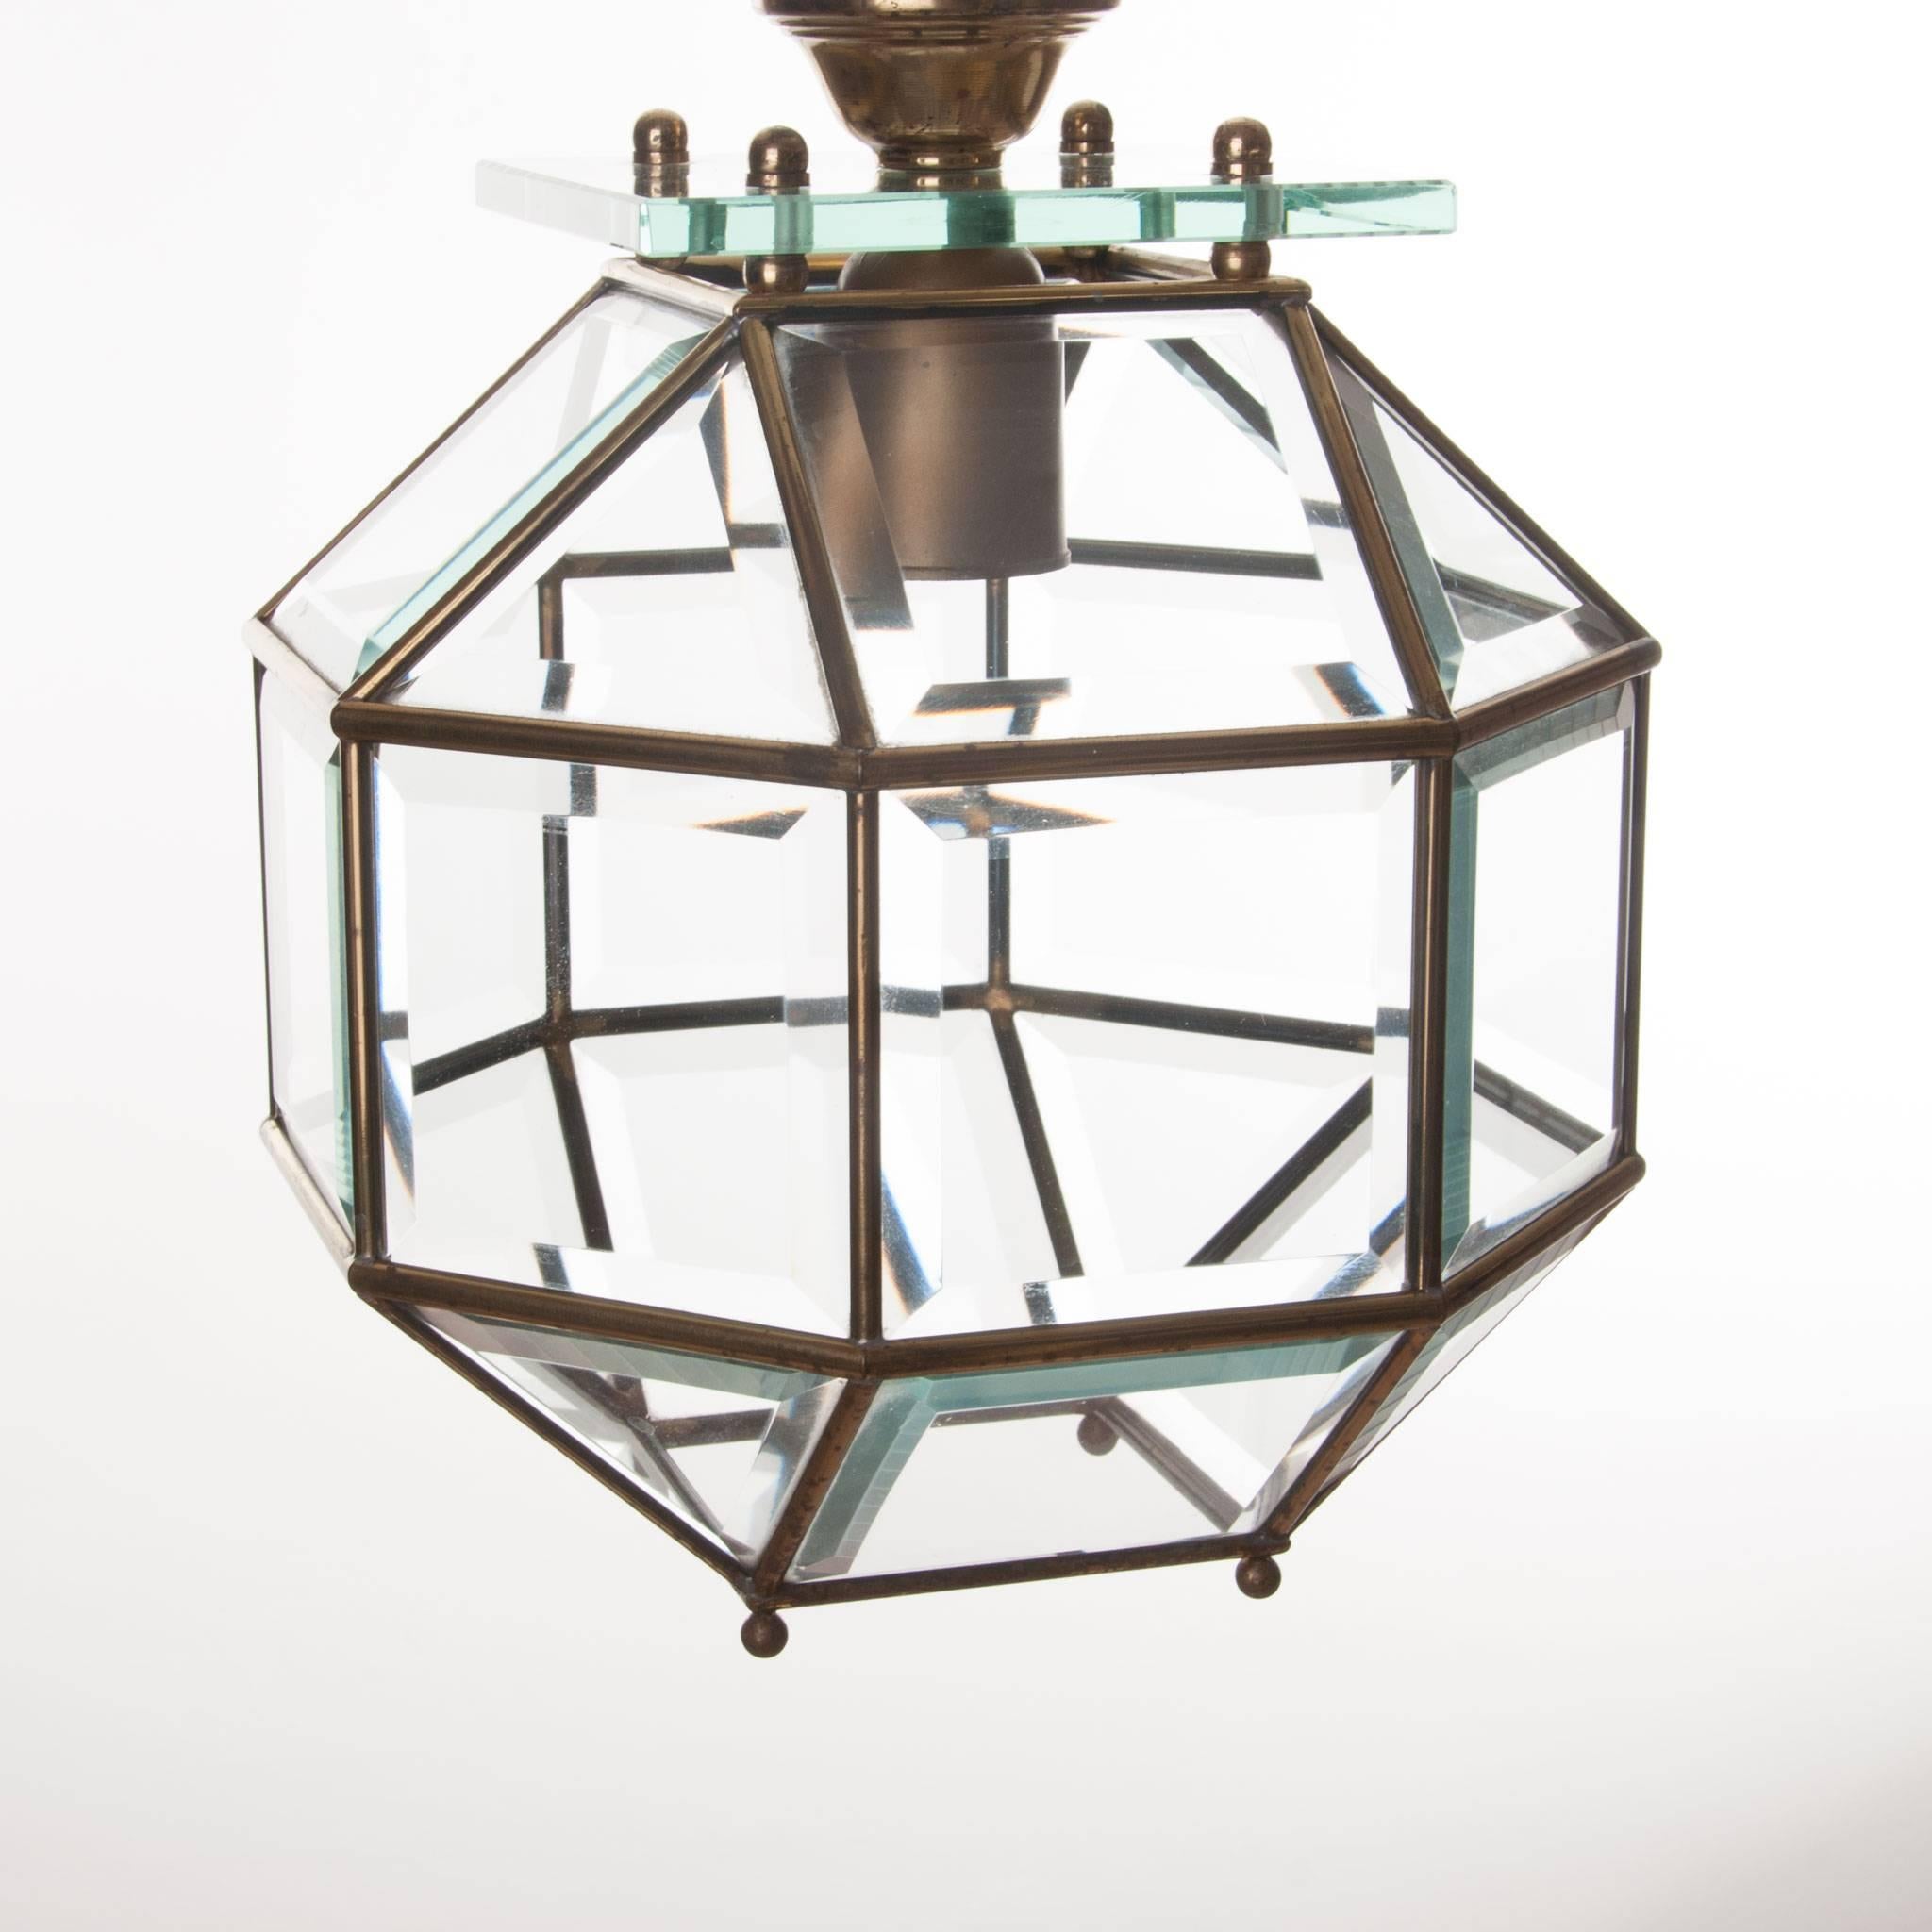 Stylish lantern consist of a brass frame with cut crystal glass, hanging from a thick square glass plate. Great feature! 
Manufactured, circa 1950s.